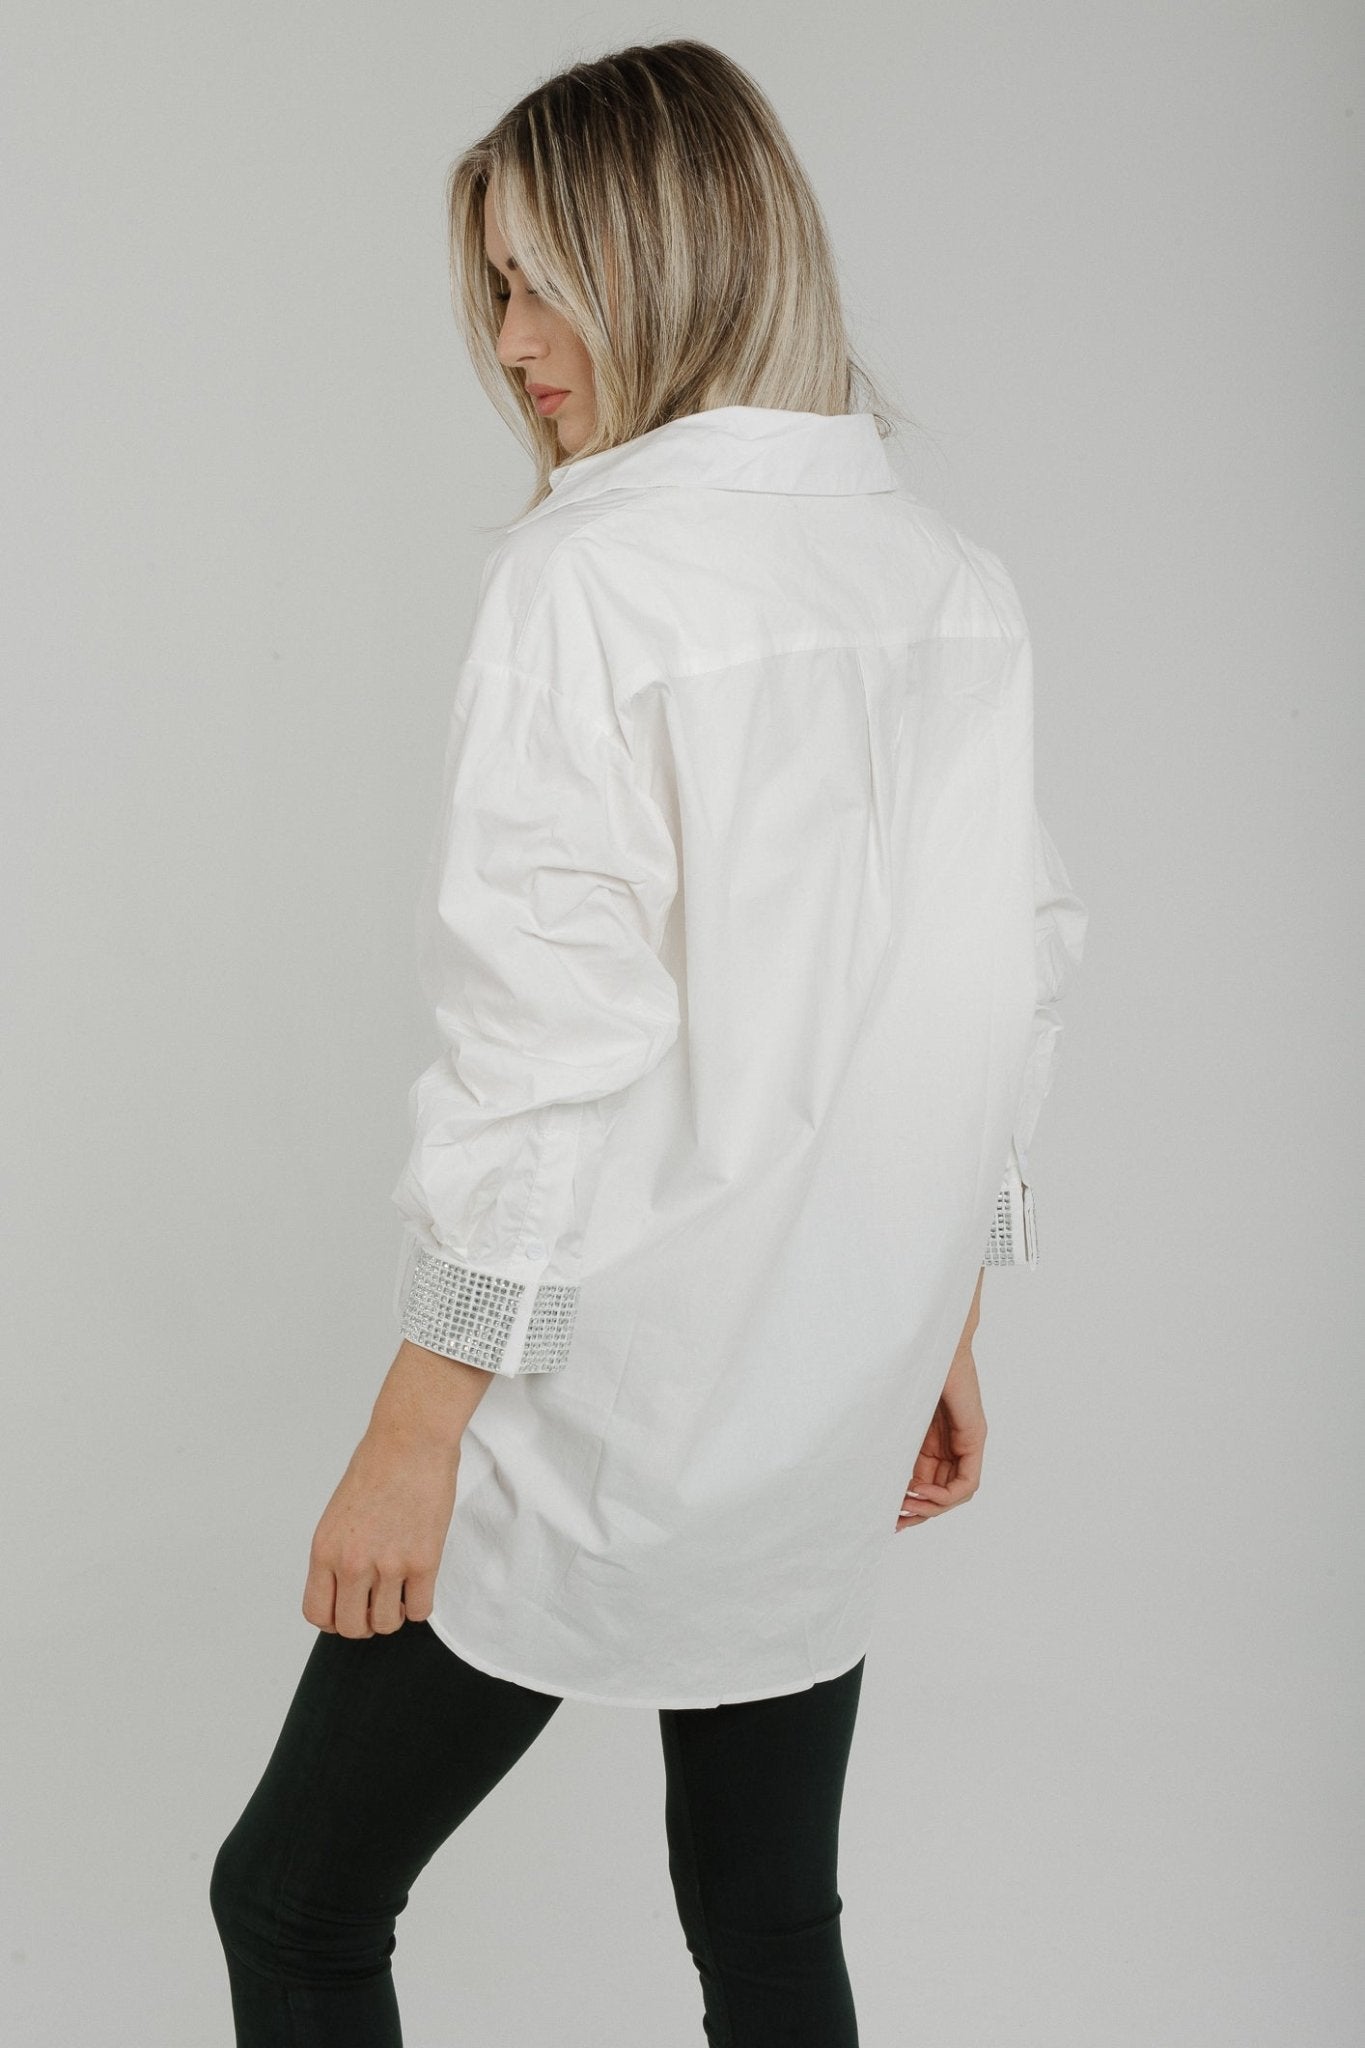 Holly Embellished Cuff Shirt In White - The Walk in Wardrobe